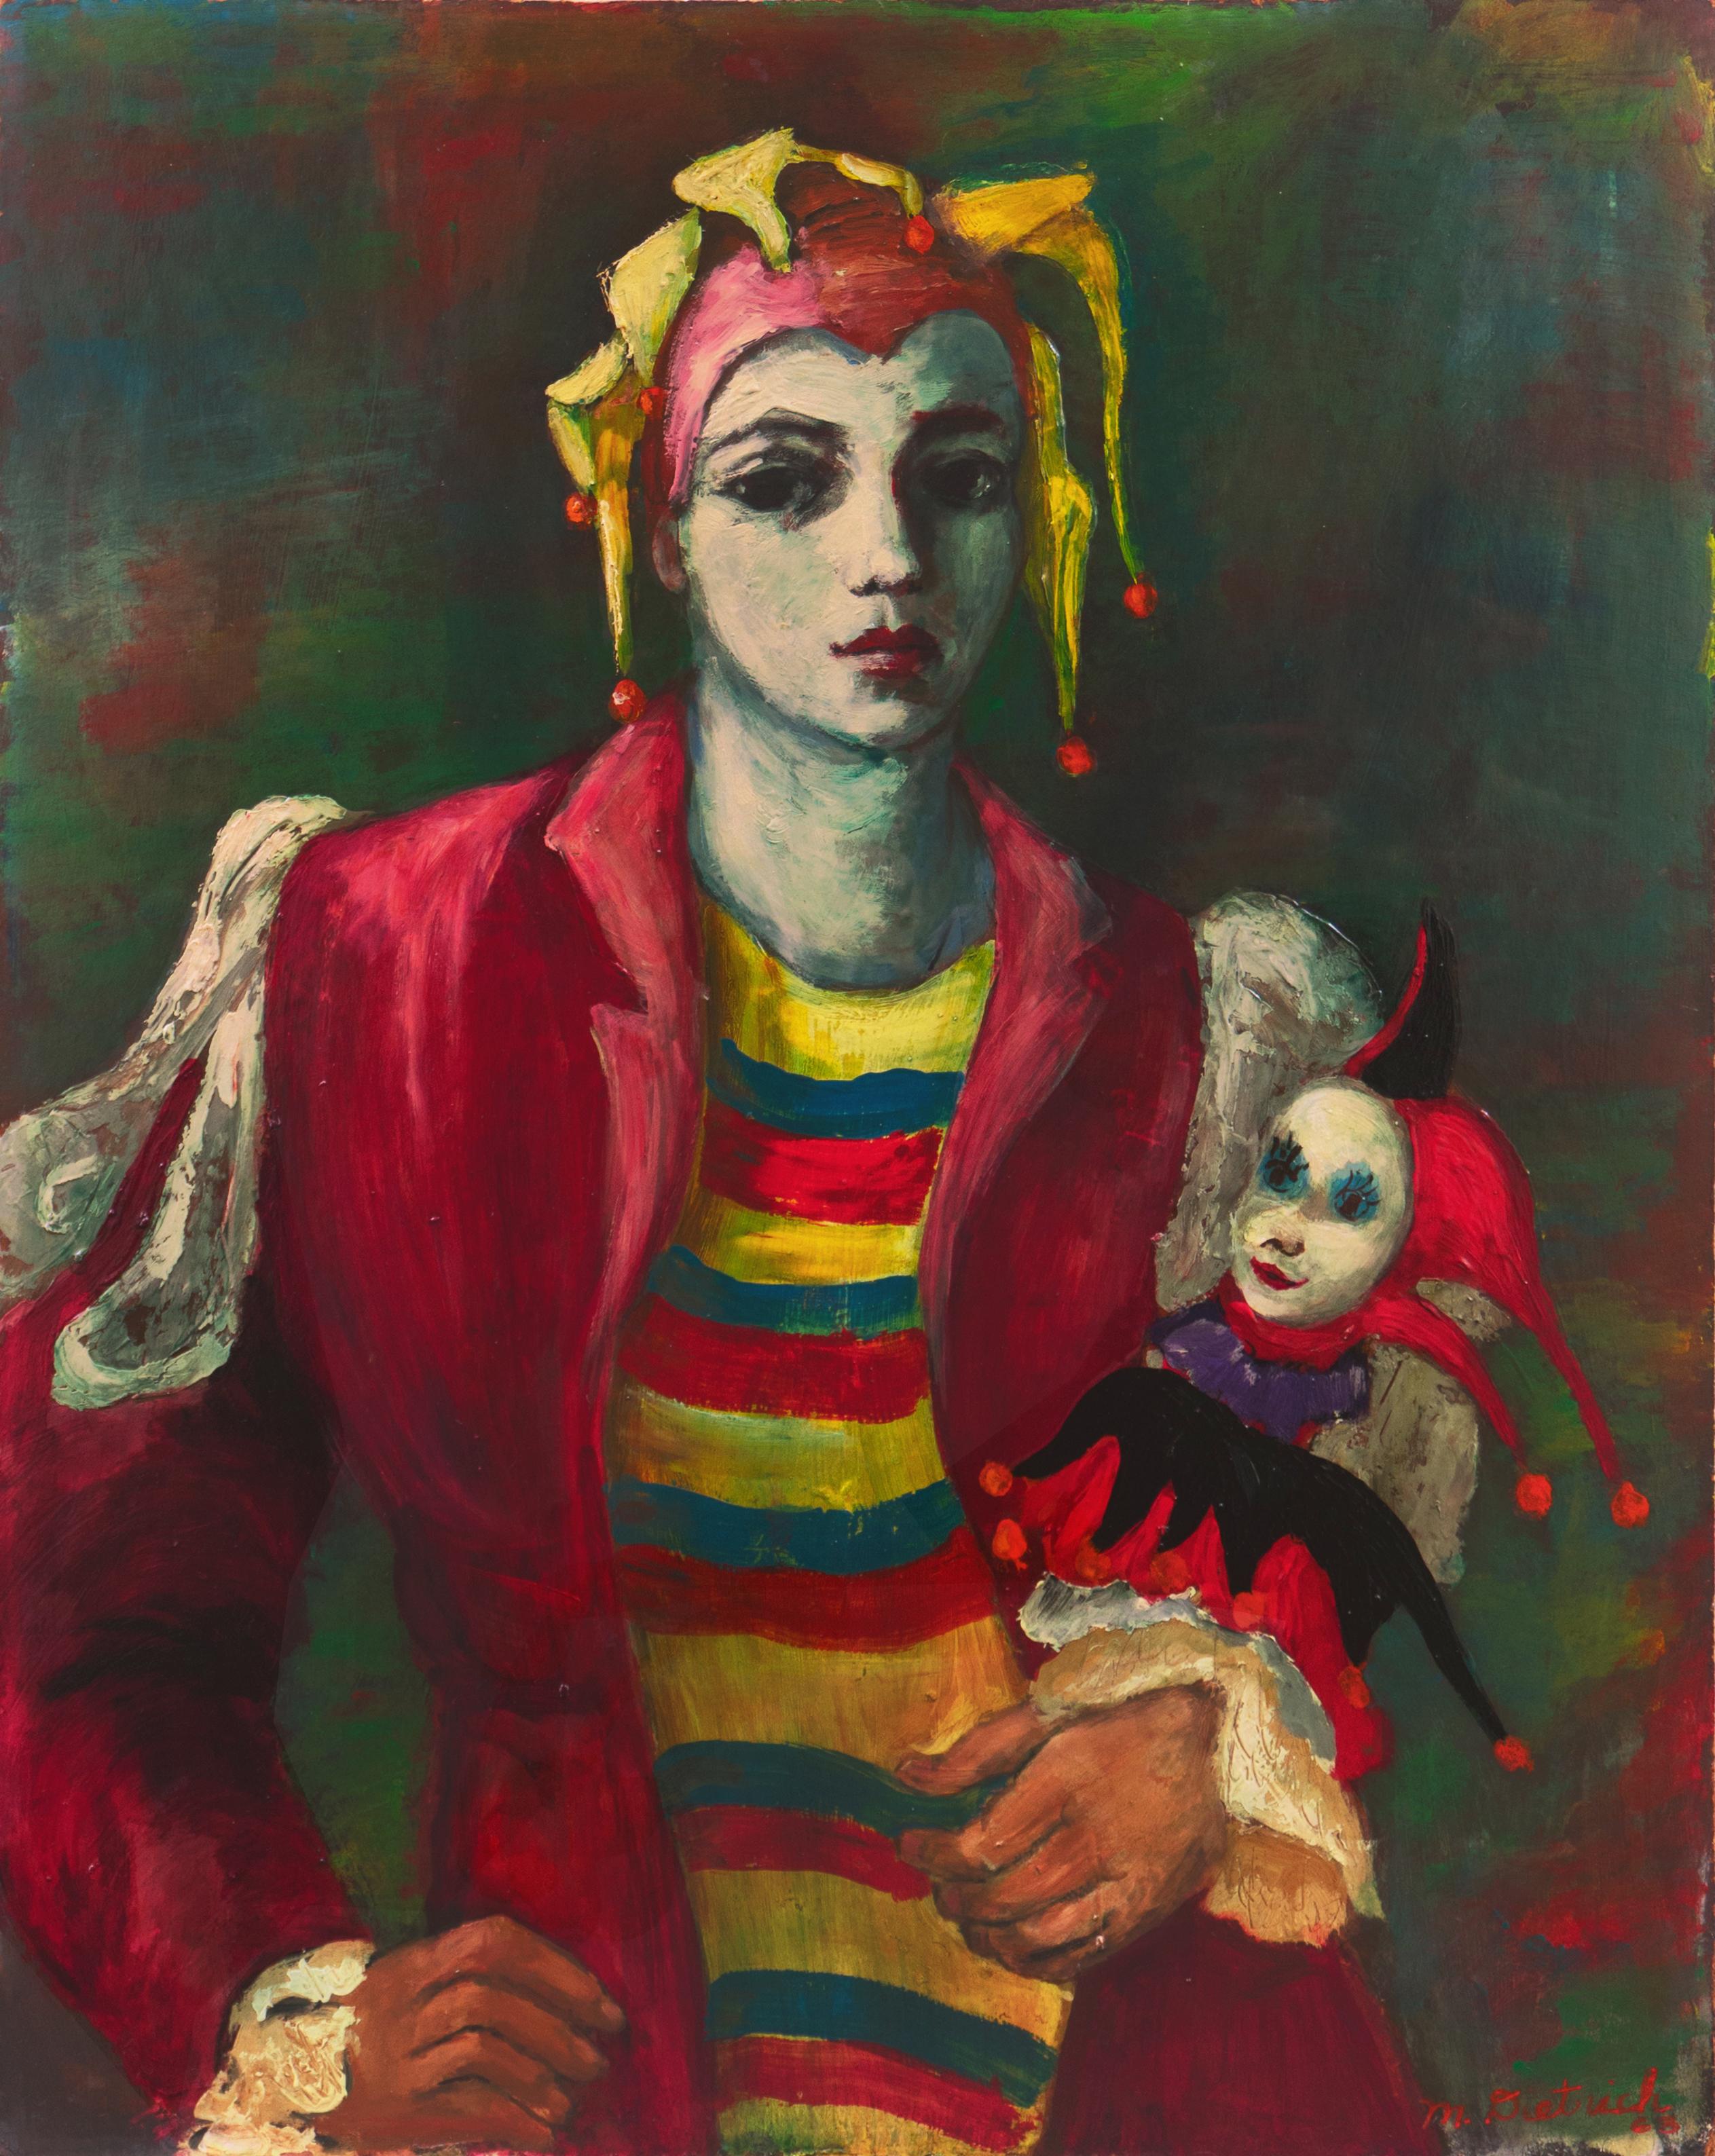 M. Dietrich Figurative Painting - 'Young Court Jester Holding a Puppet', Commedia dellArte, Post Impressionist 